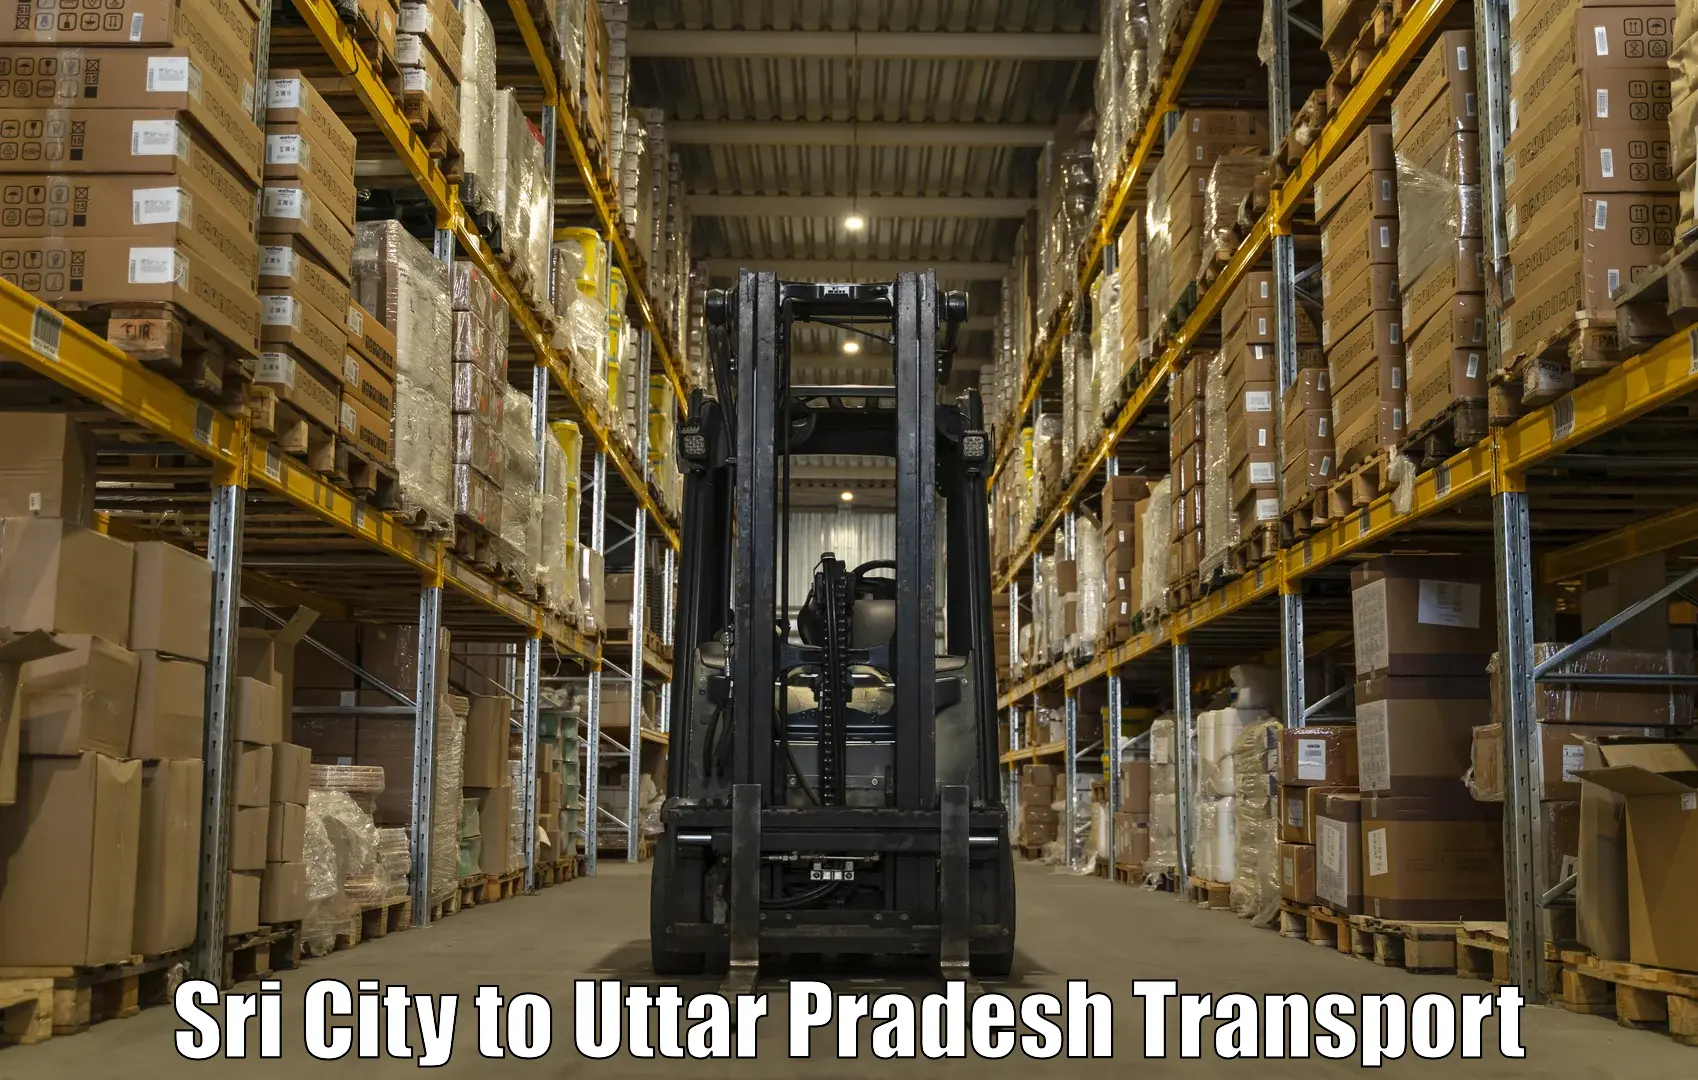 Daily parcel service transport in Sri City to Hathras